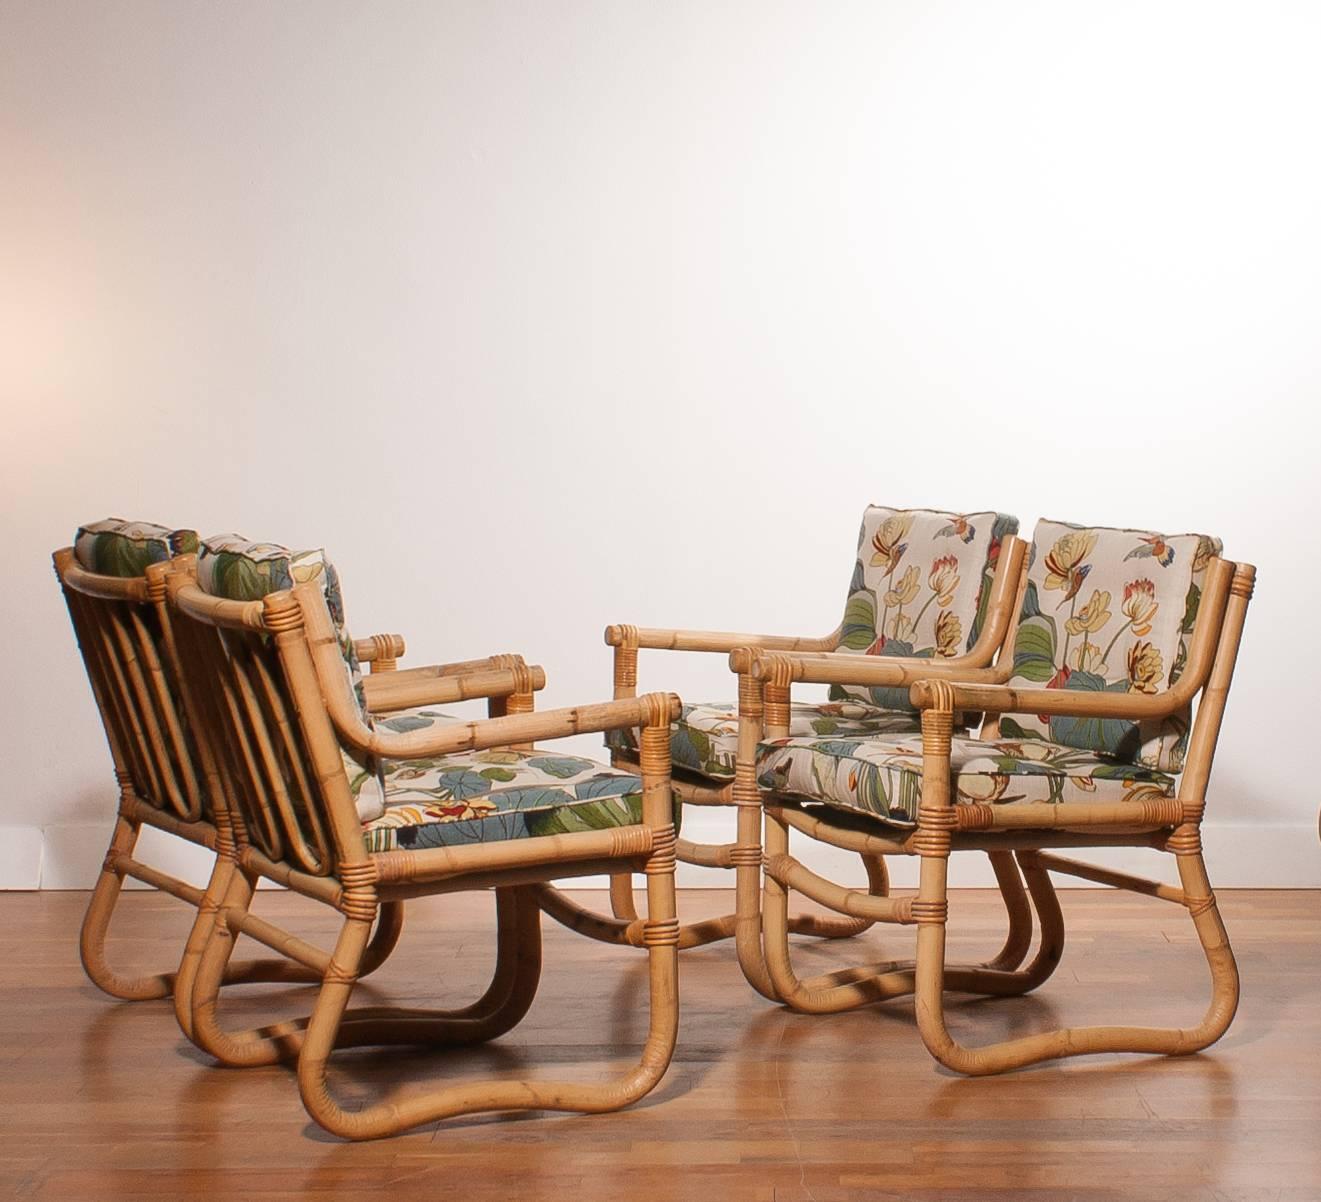 Beautiful bamboo garden set consist of four chairs and a square table.
The chairs are in a excellent condition.
The reversible cushions are designed by Josef Frank and in a very good condition.
Period 1960s
Dimensions: Chair H. 80 cm, W. 60 cm,